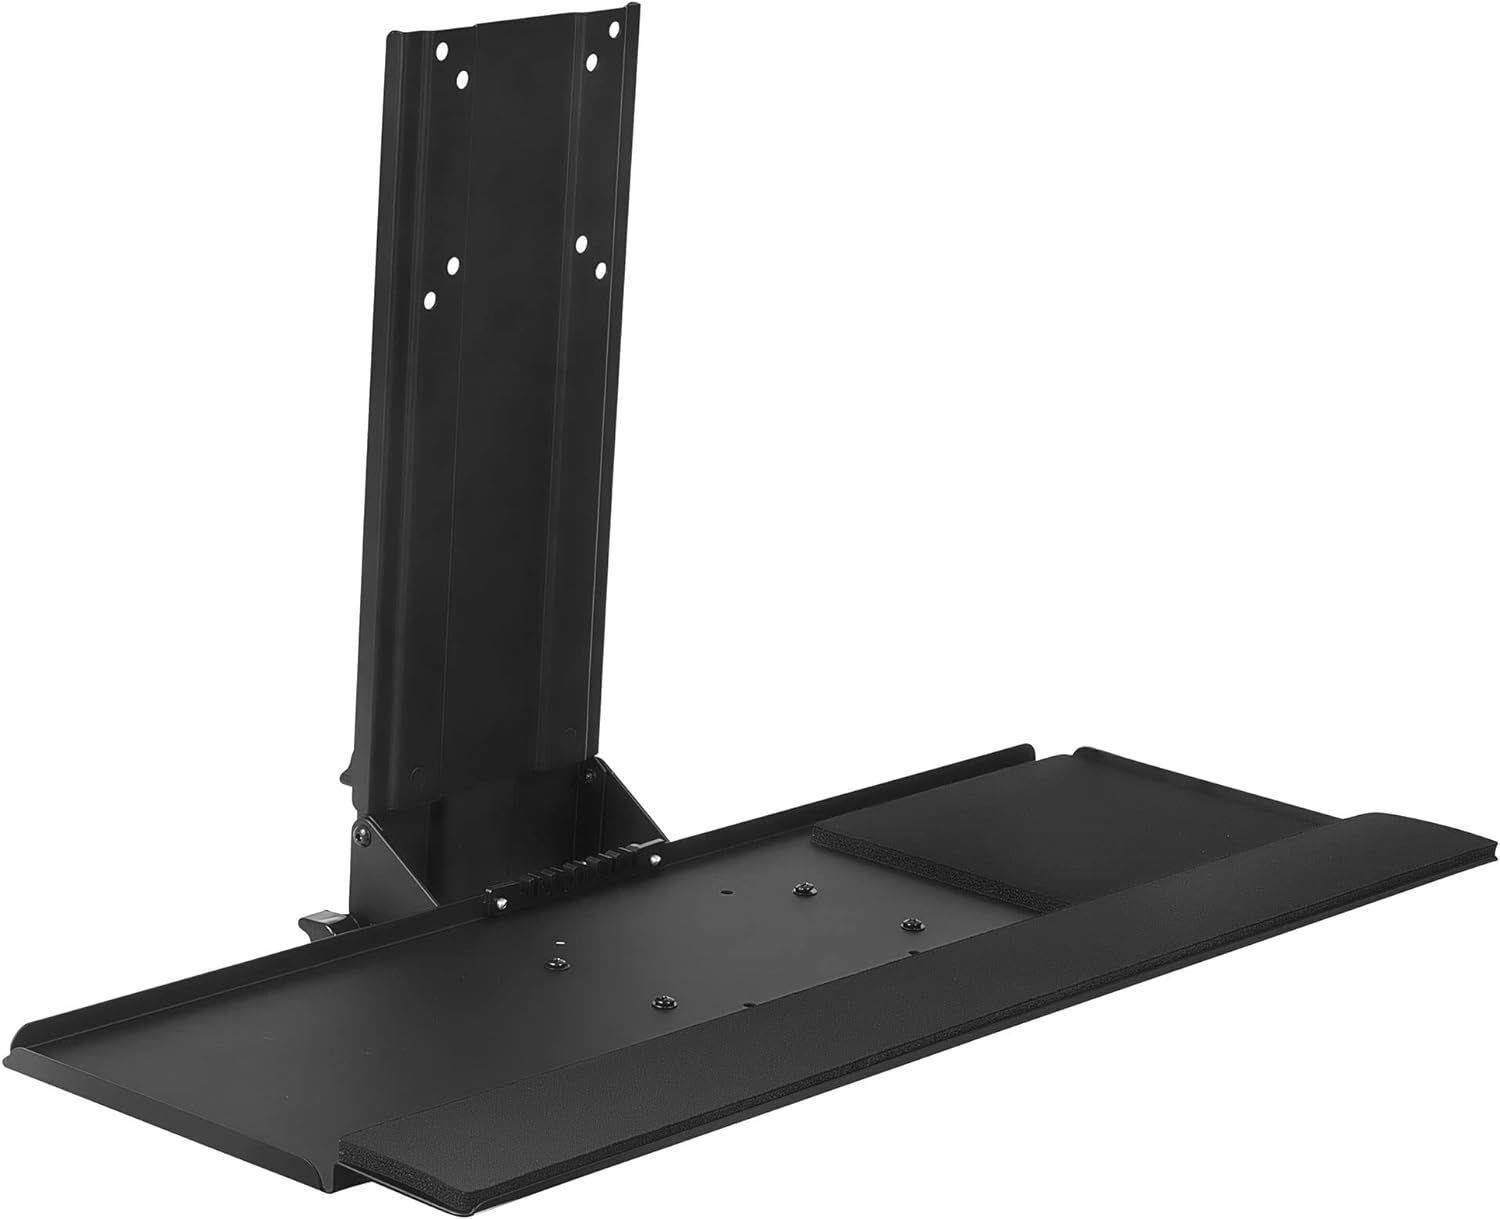 NEW $62 Monitor and Keyboard Wall Mount